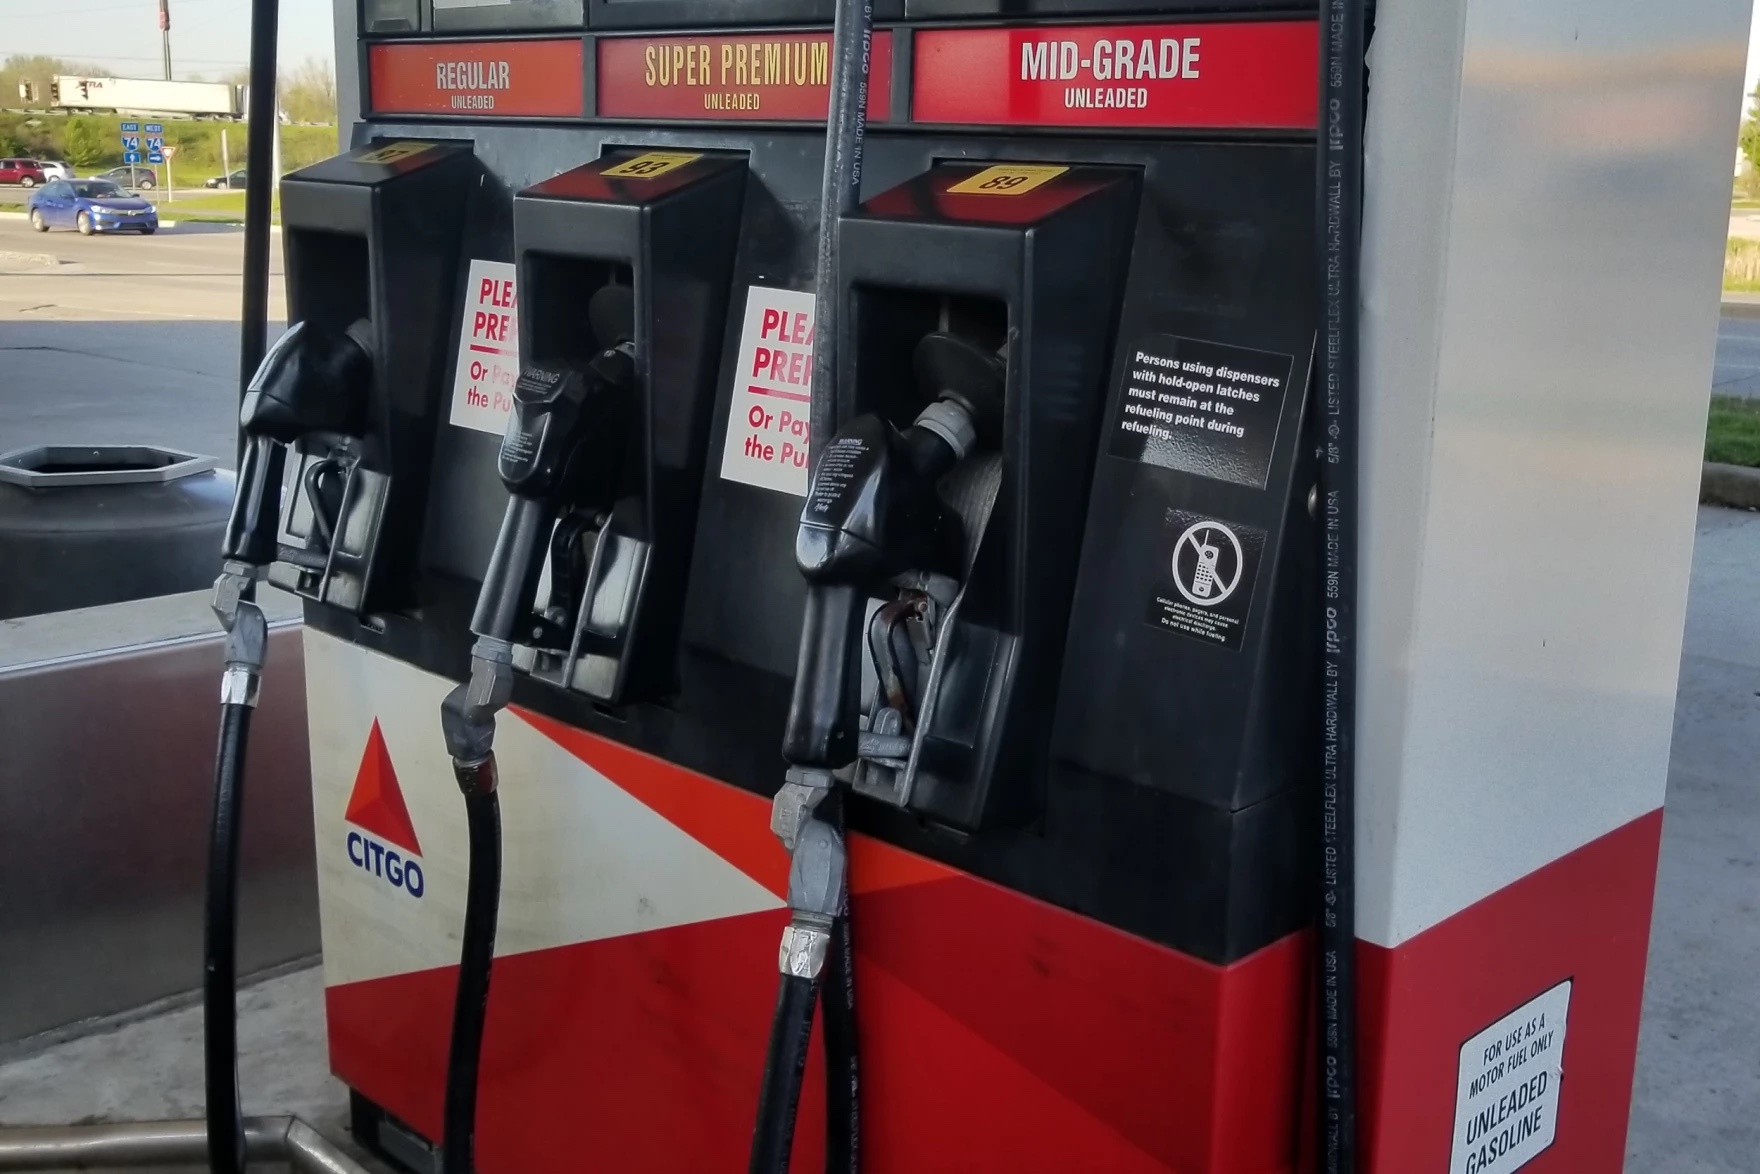 indiana-gas-tax-on-the-rise-in-november-after-two-months-of-decline